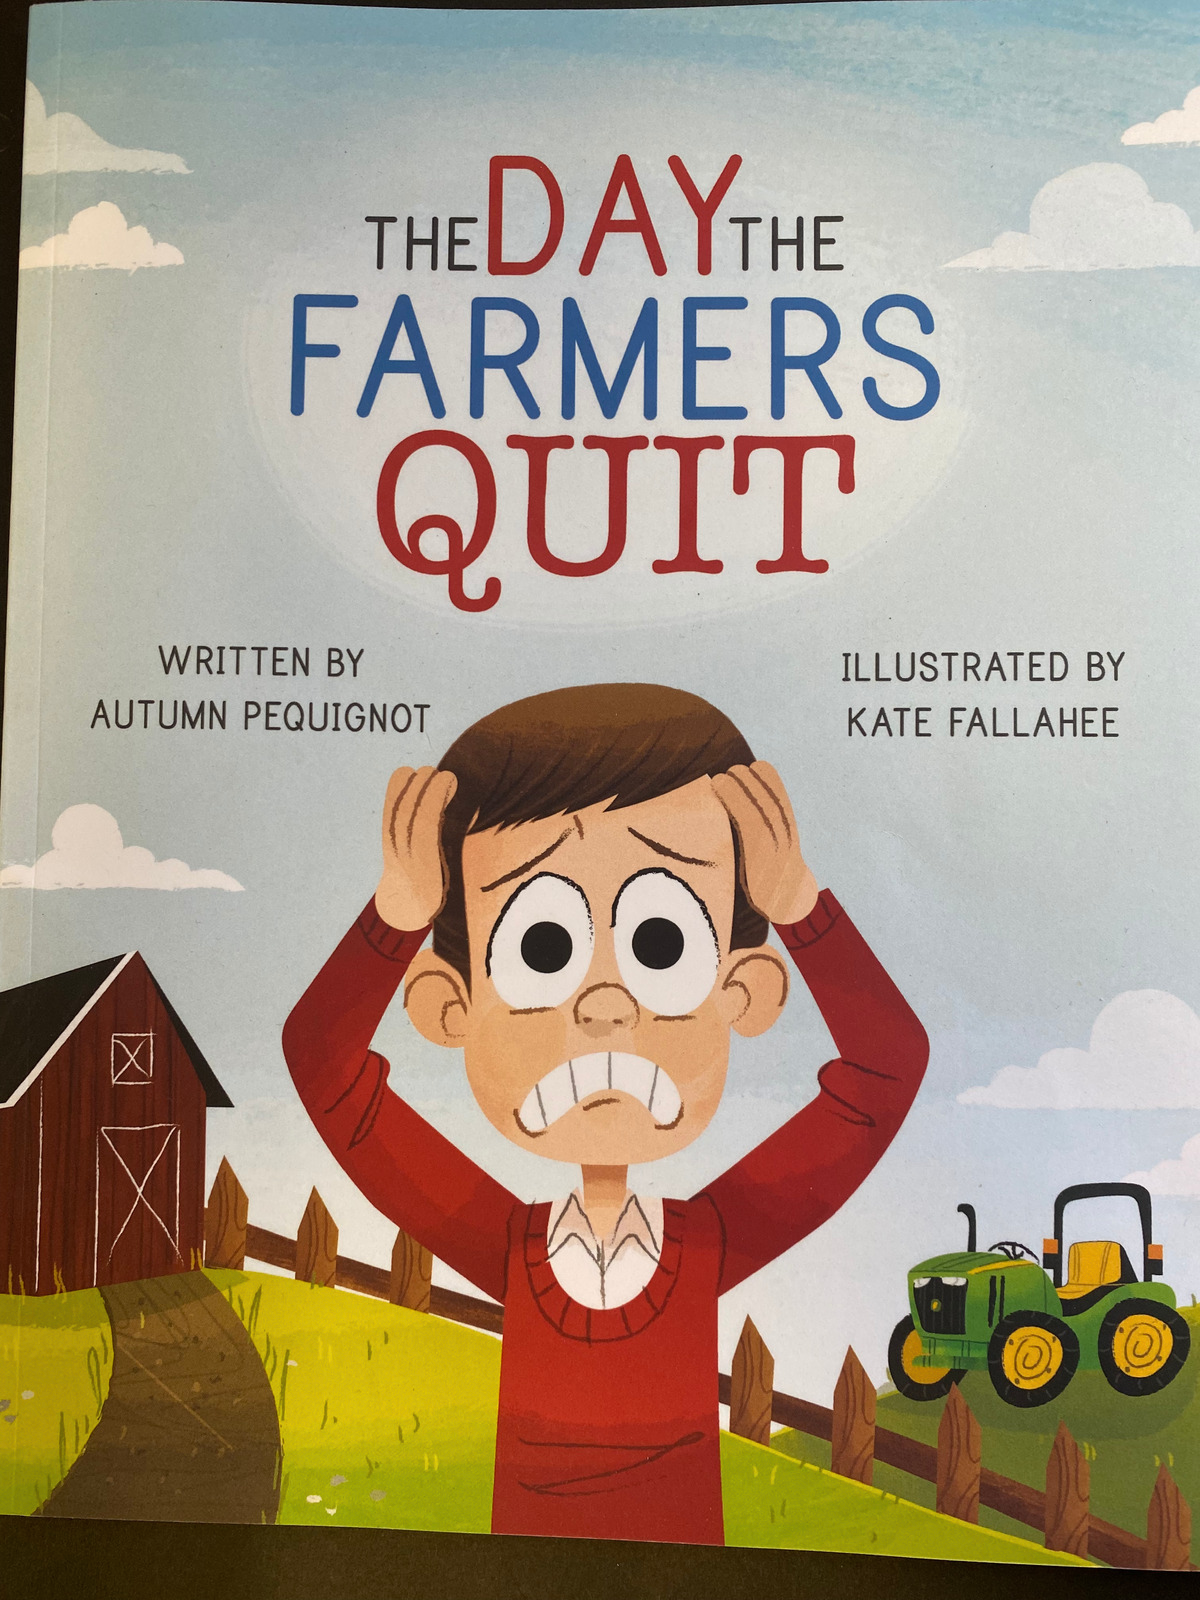 The Day the Farmers Quit book cover image